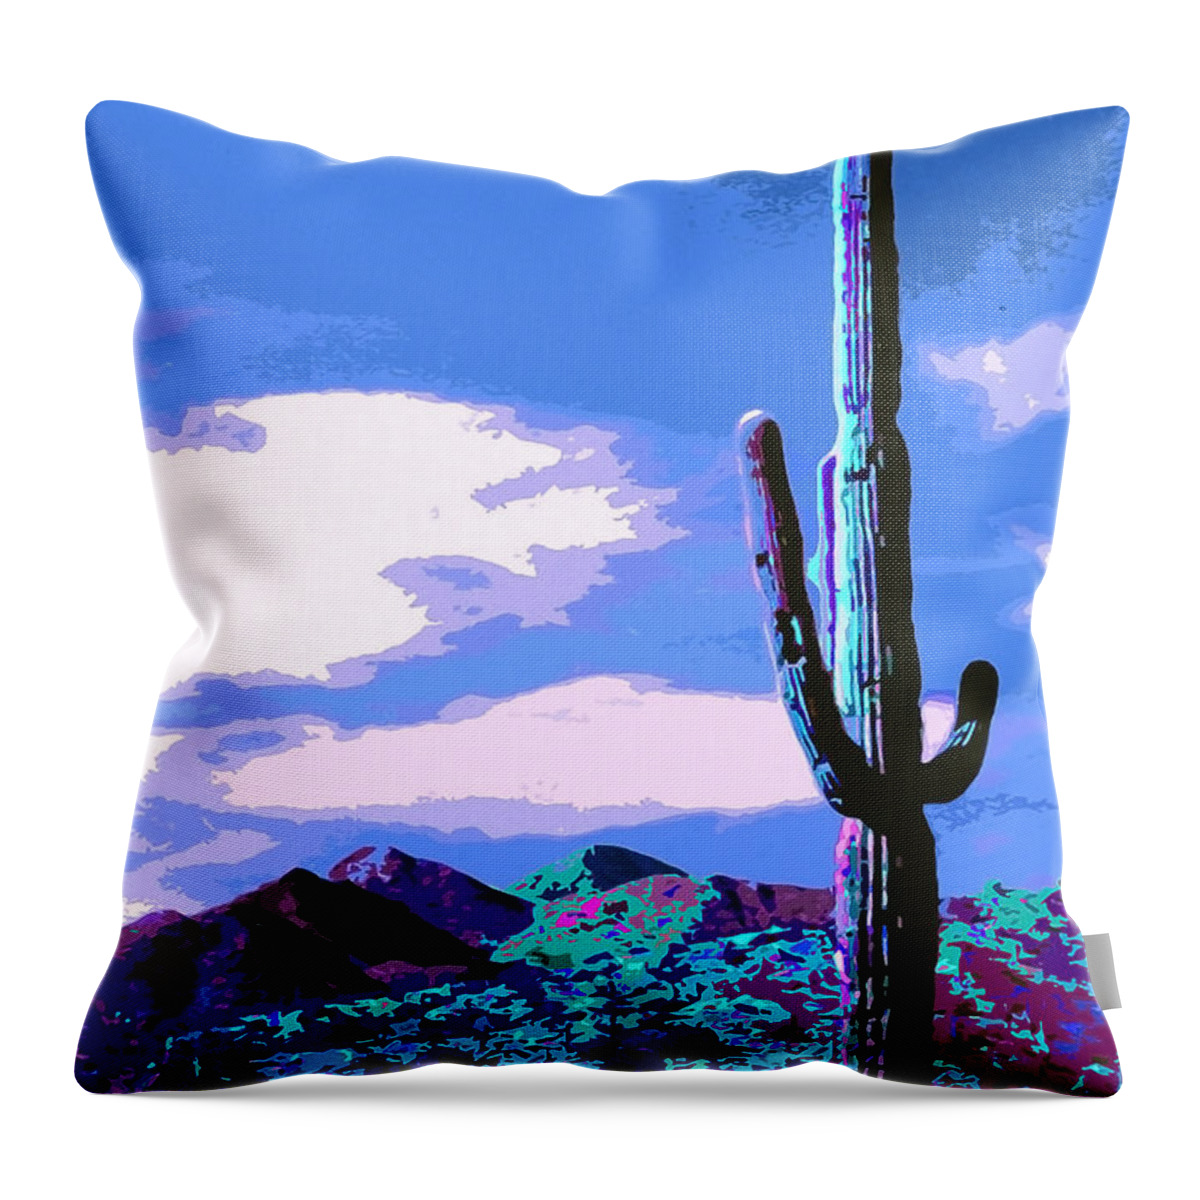 Arizona Throw Pillow featuring the painting Arizona Blue by CHAZ Daugherty